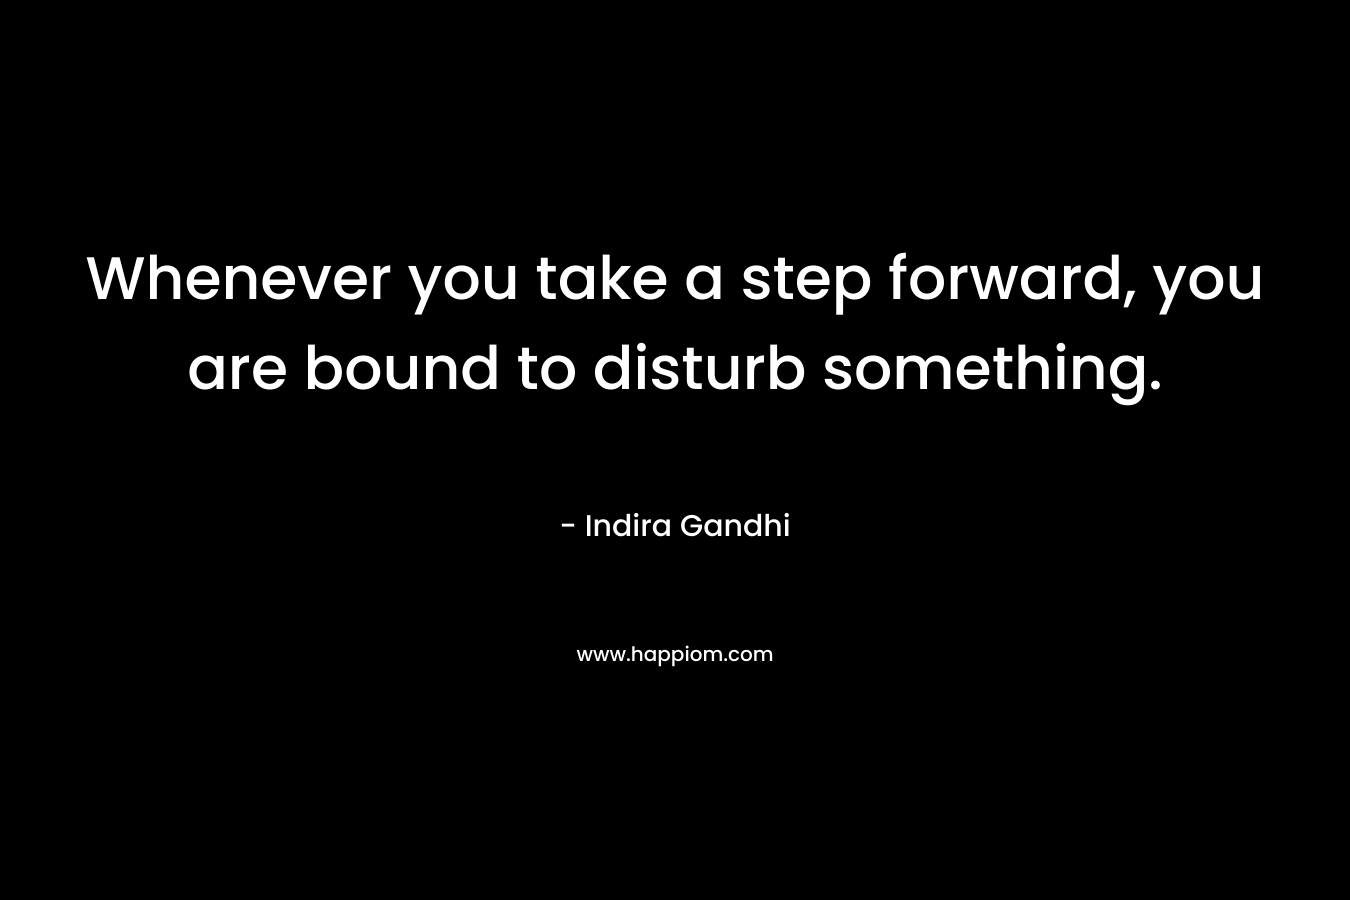 Whenever you take a step forward, you are bound to disturb something. – Indira Gandhi